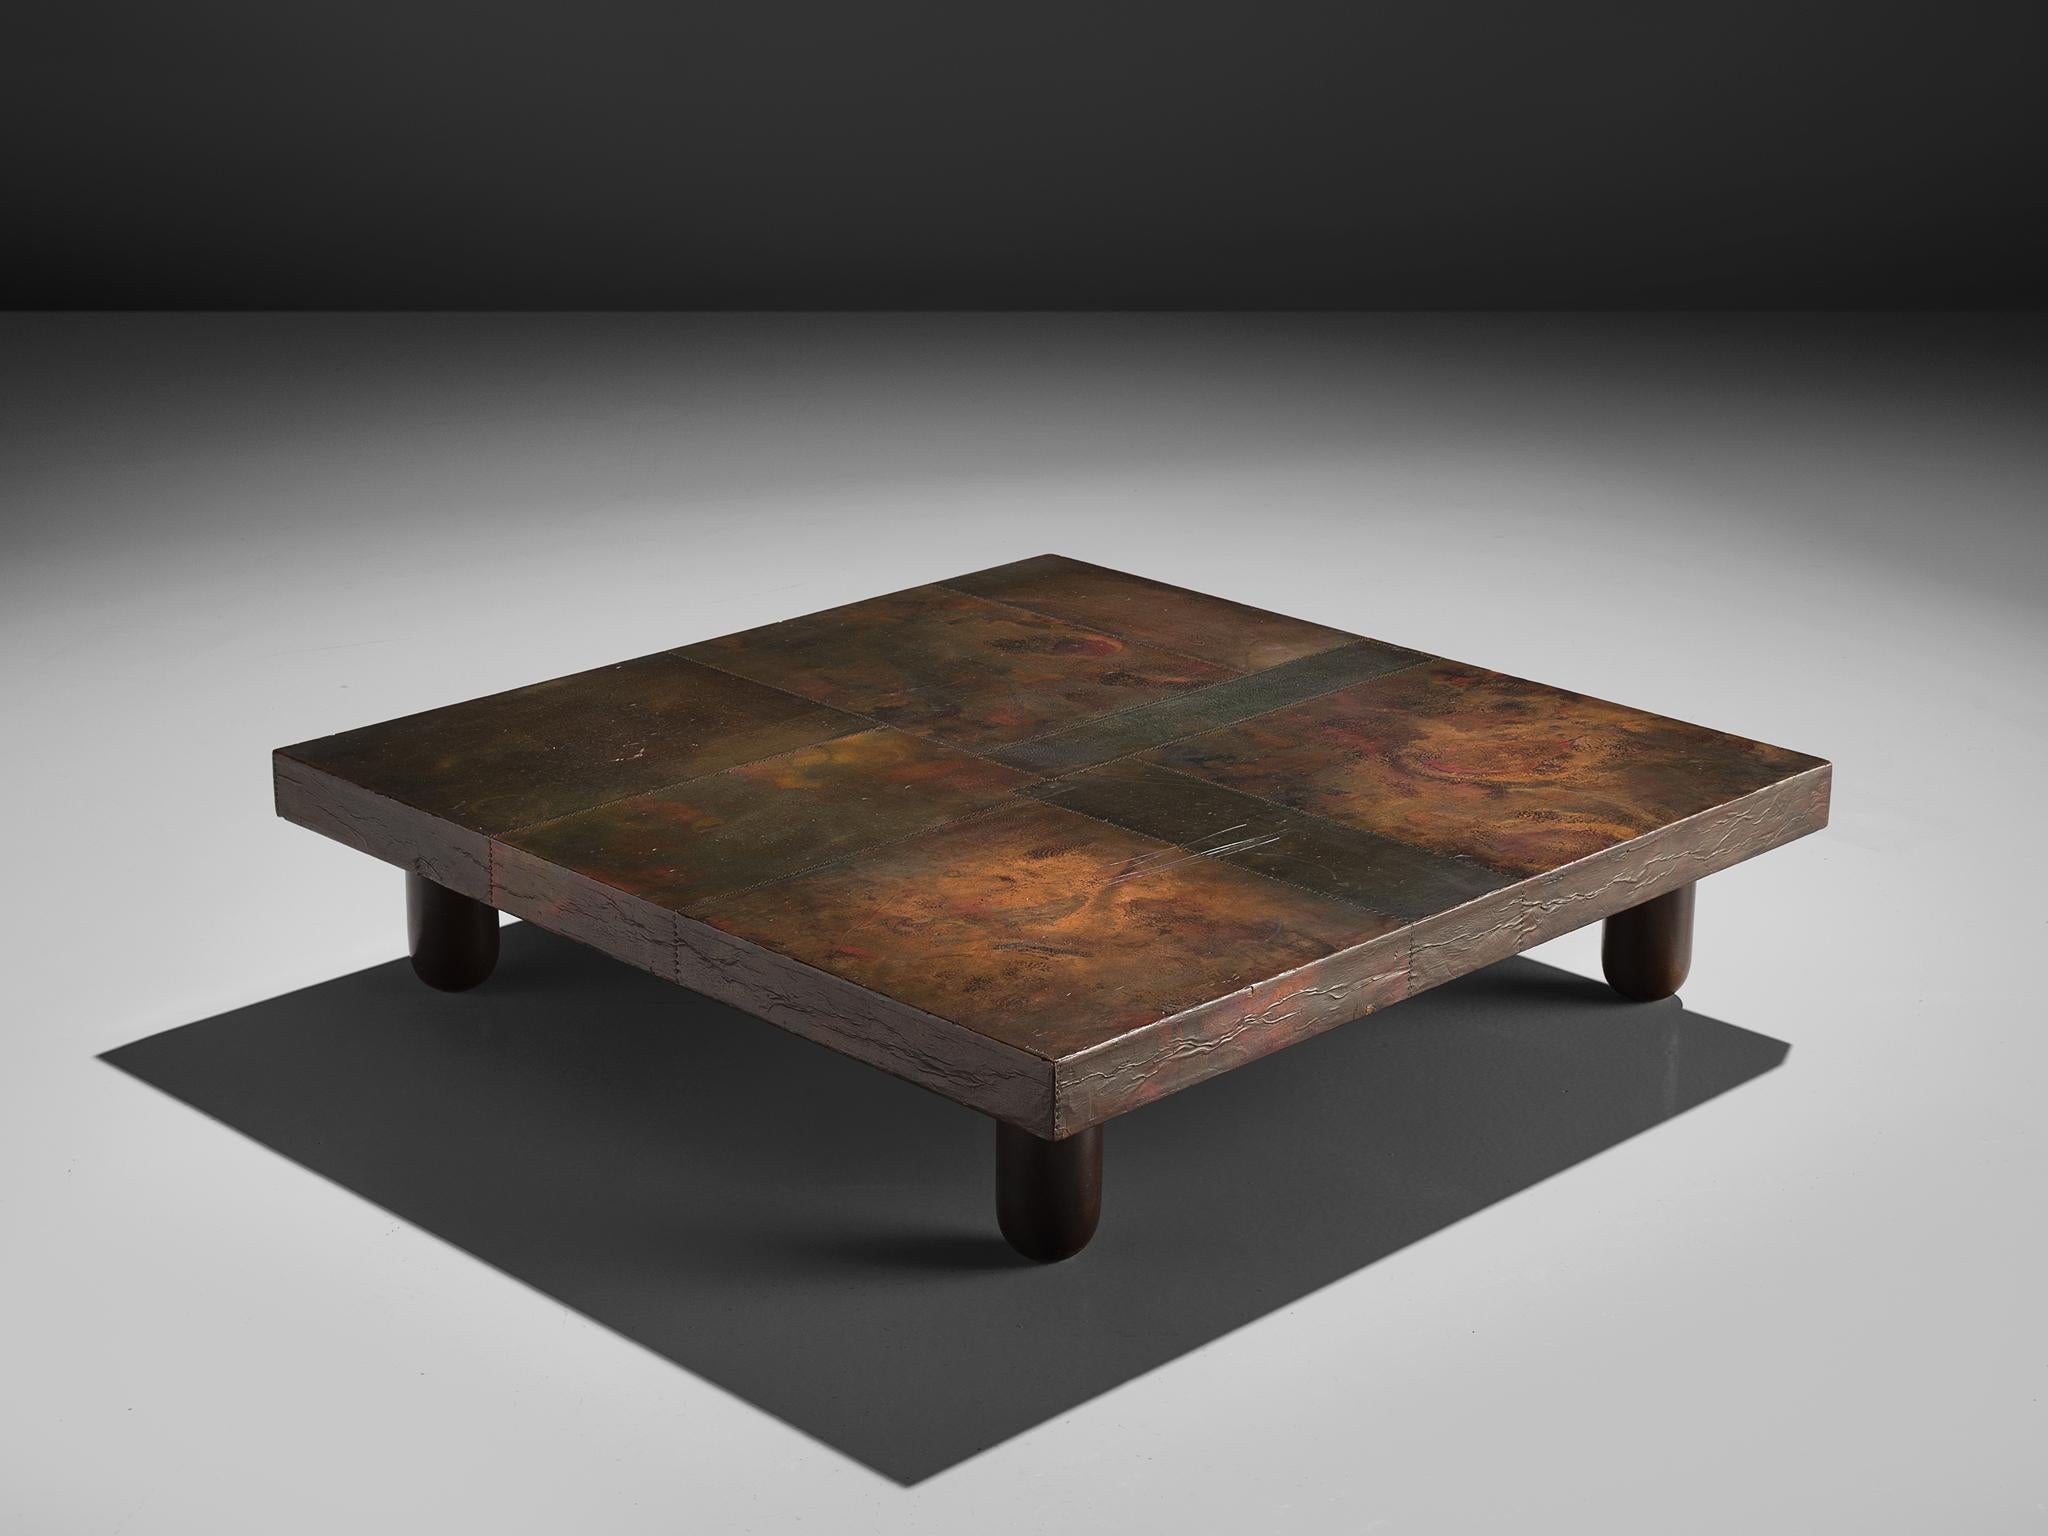 Coffee or cocktail table, copper and wood, 1960s, Italy.

This coffee table is an eyecatcher. The copper is in beautiful, patinated condition and the vibrant yet natural rust or earth-like color is something out of this world. Lorenzo Burchiellaro